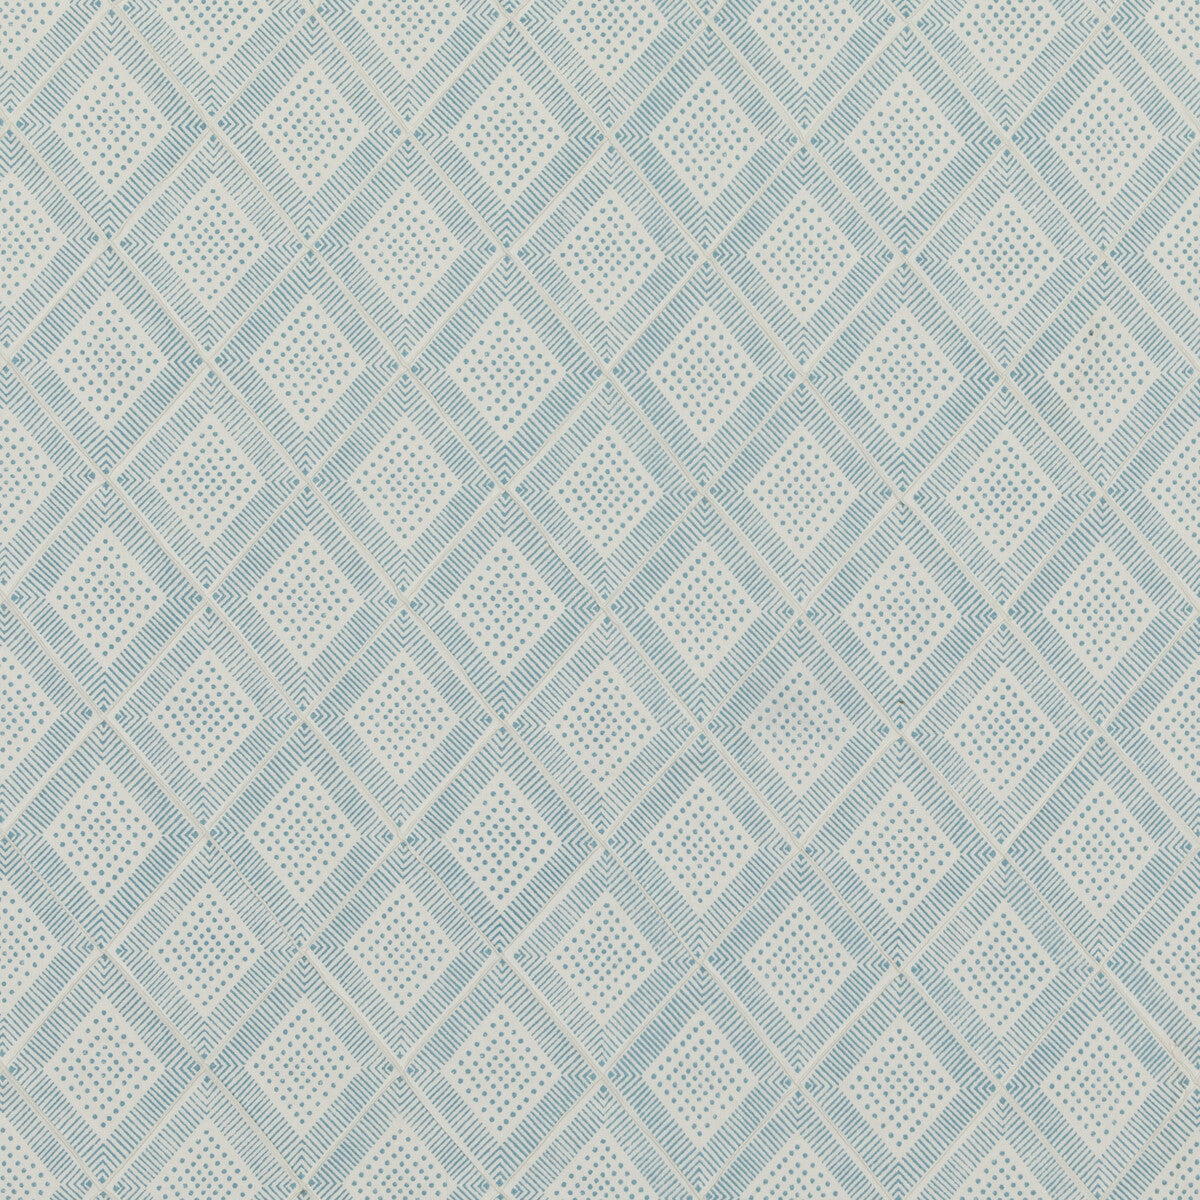 Block Trellis fabric in aqua color - pattern PP50484.3.0 - by Baker Lifestyle in the Block Party collection